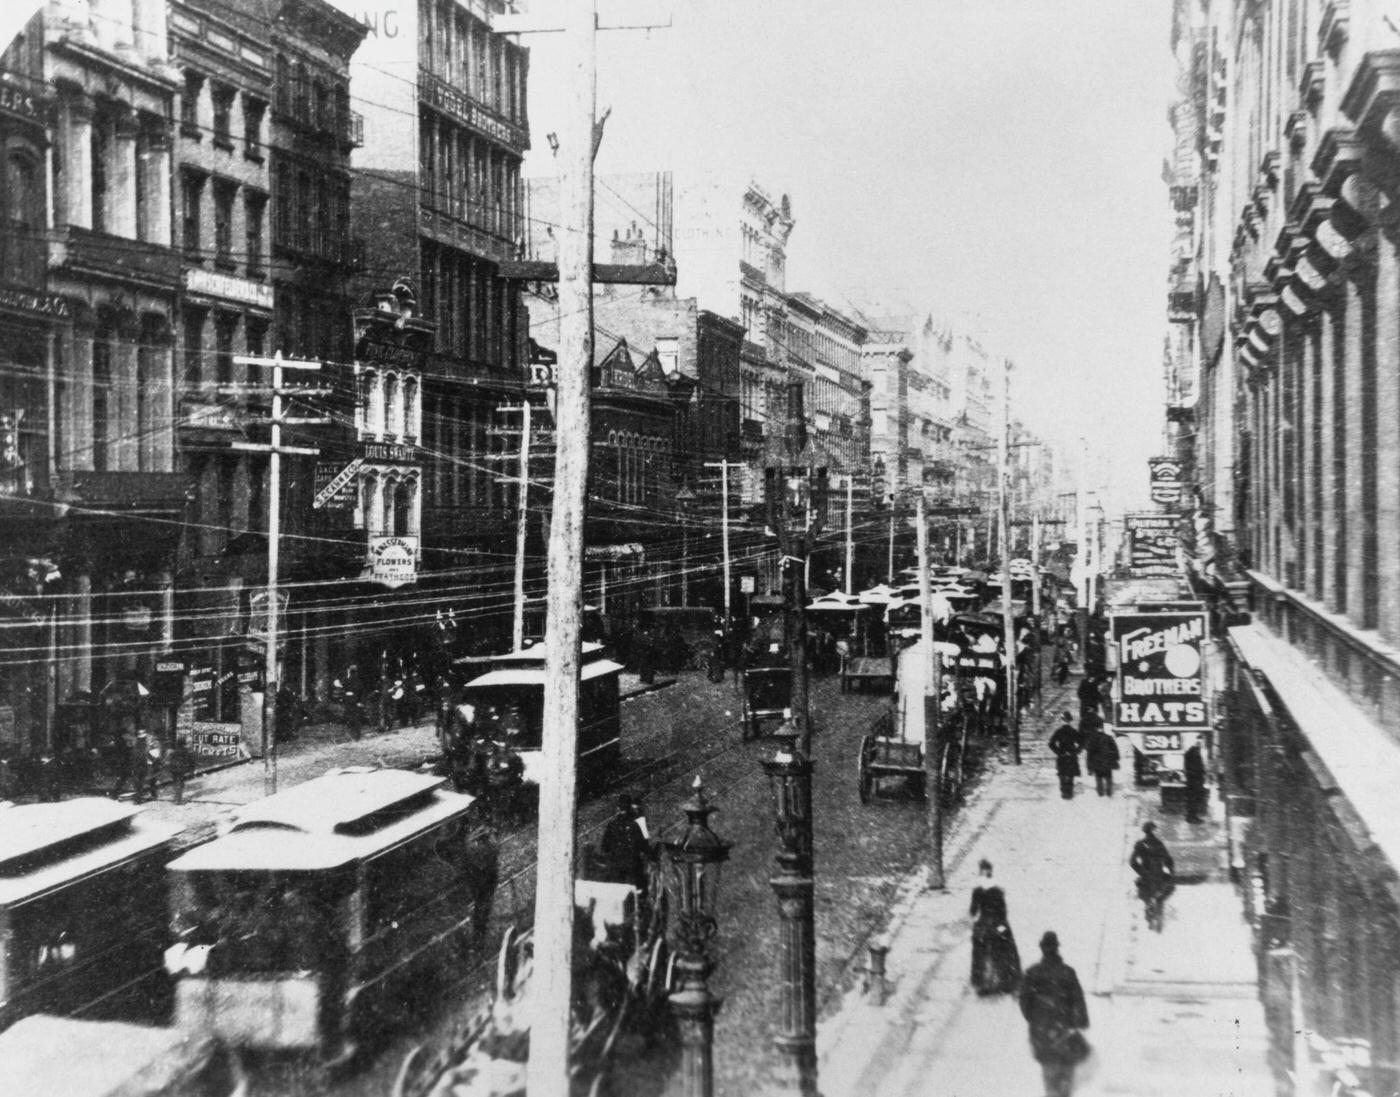 Traffic On Broadway From The Metropolitan Hotel, New York City, 1880